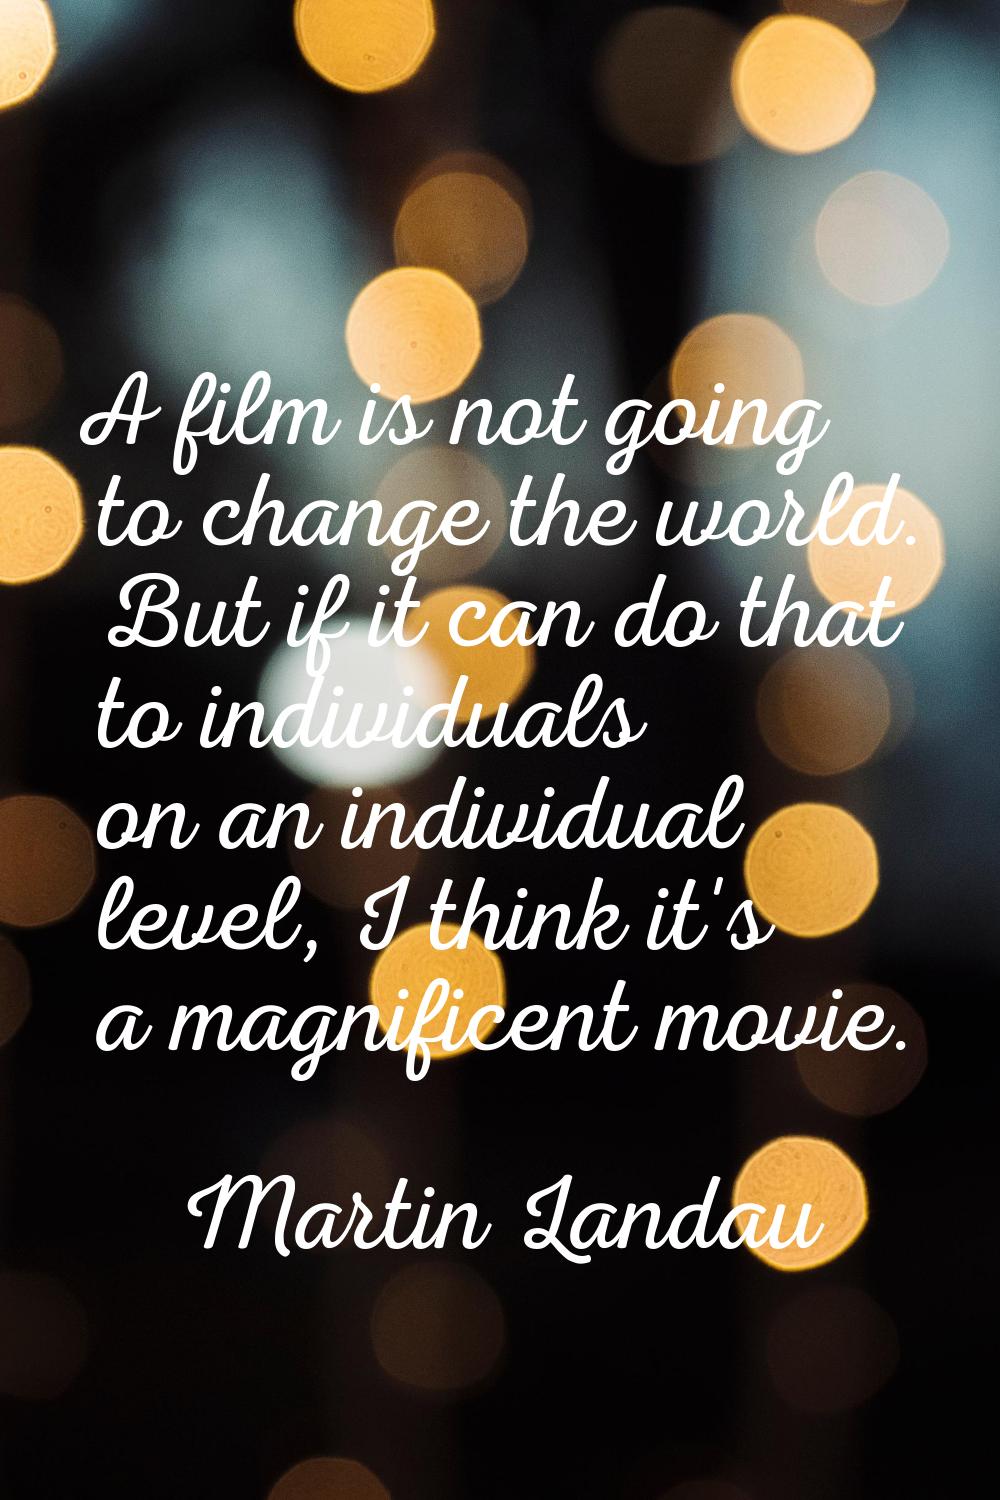 A film is not going to change the world. But if it can do that to individuals on an individual leve